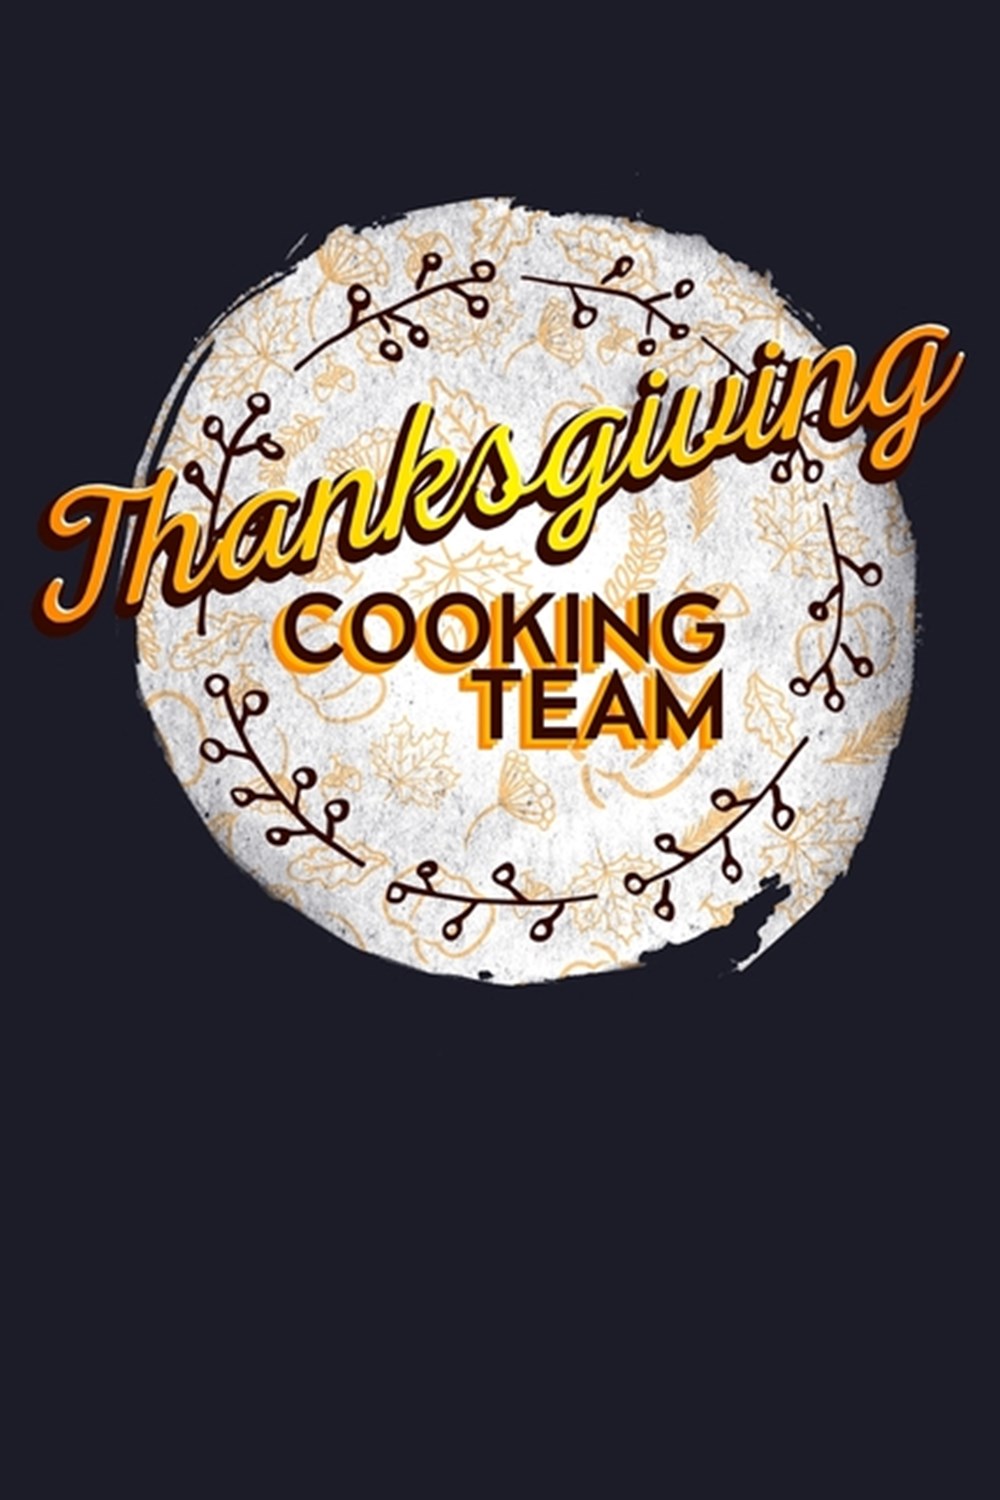 Thanksgiving Cooking Team Blank Cookbook Journal to Write in Recipes and Notes to Create Your Own Fa